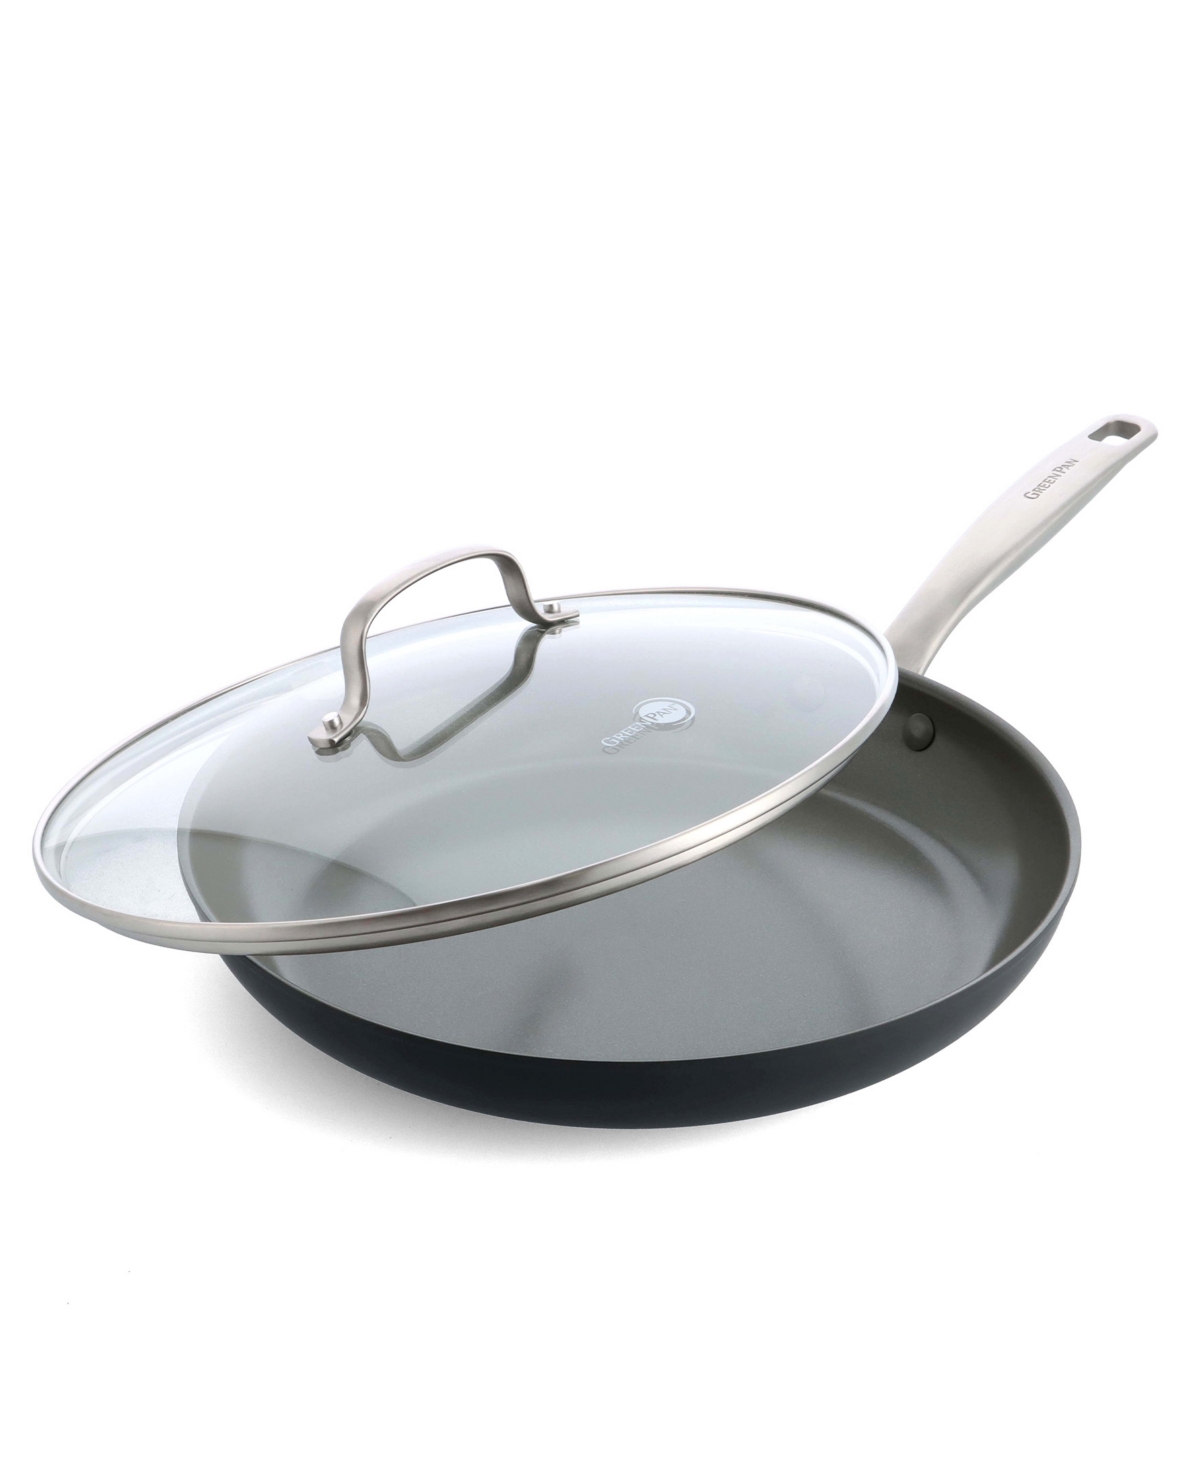 Greenpan Chatham Hard Anodized Ceramic Nonstick 12" Frying Pan With Lid In Gray